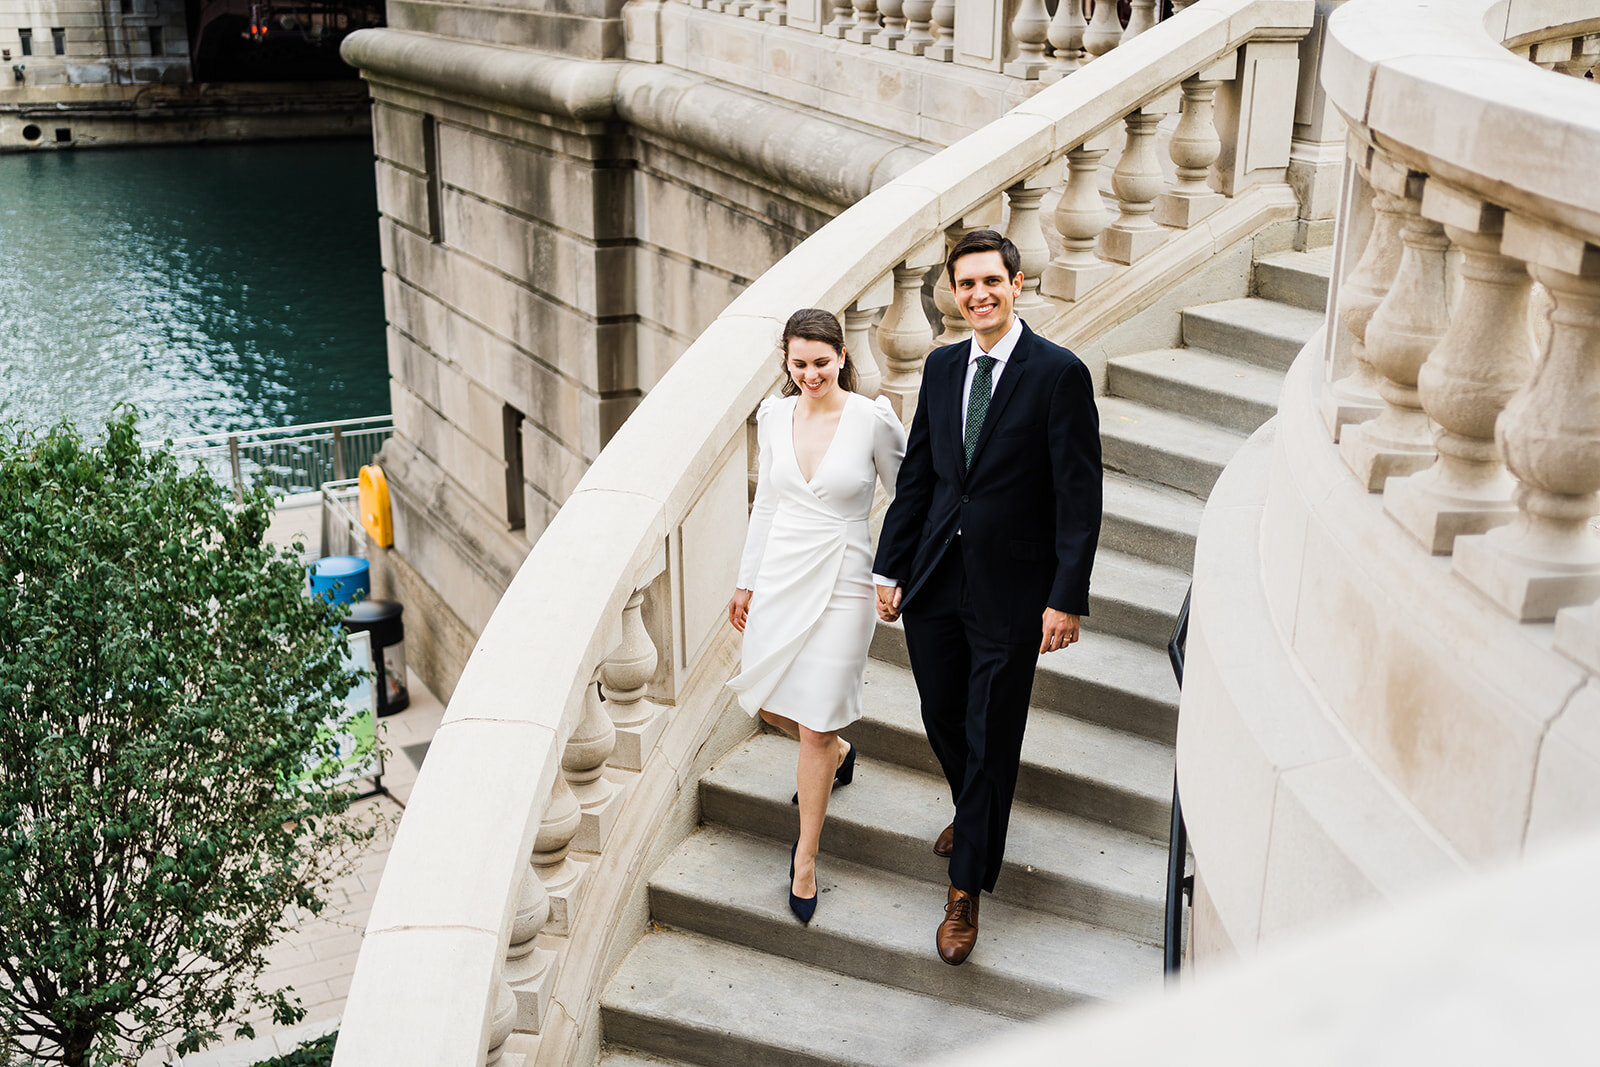 Chicago City Hall COVID Elopement by Rempel Photography featured on CHI thee WED